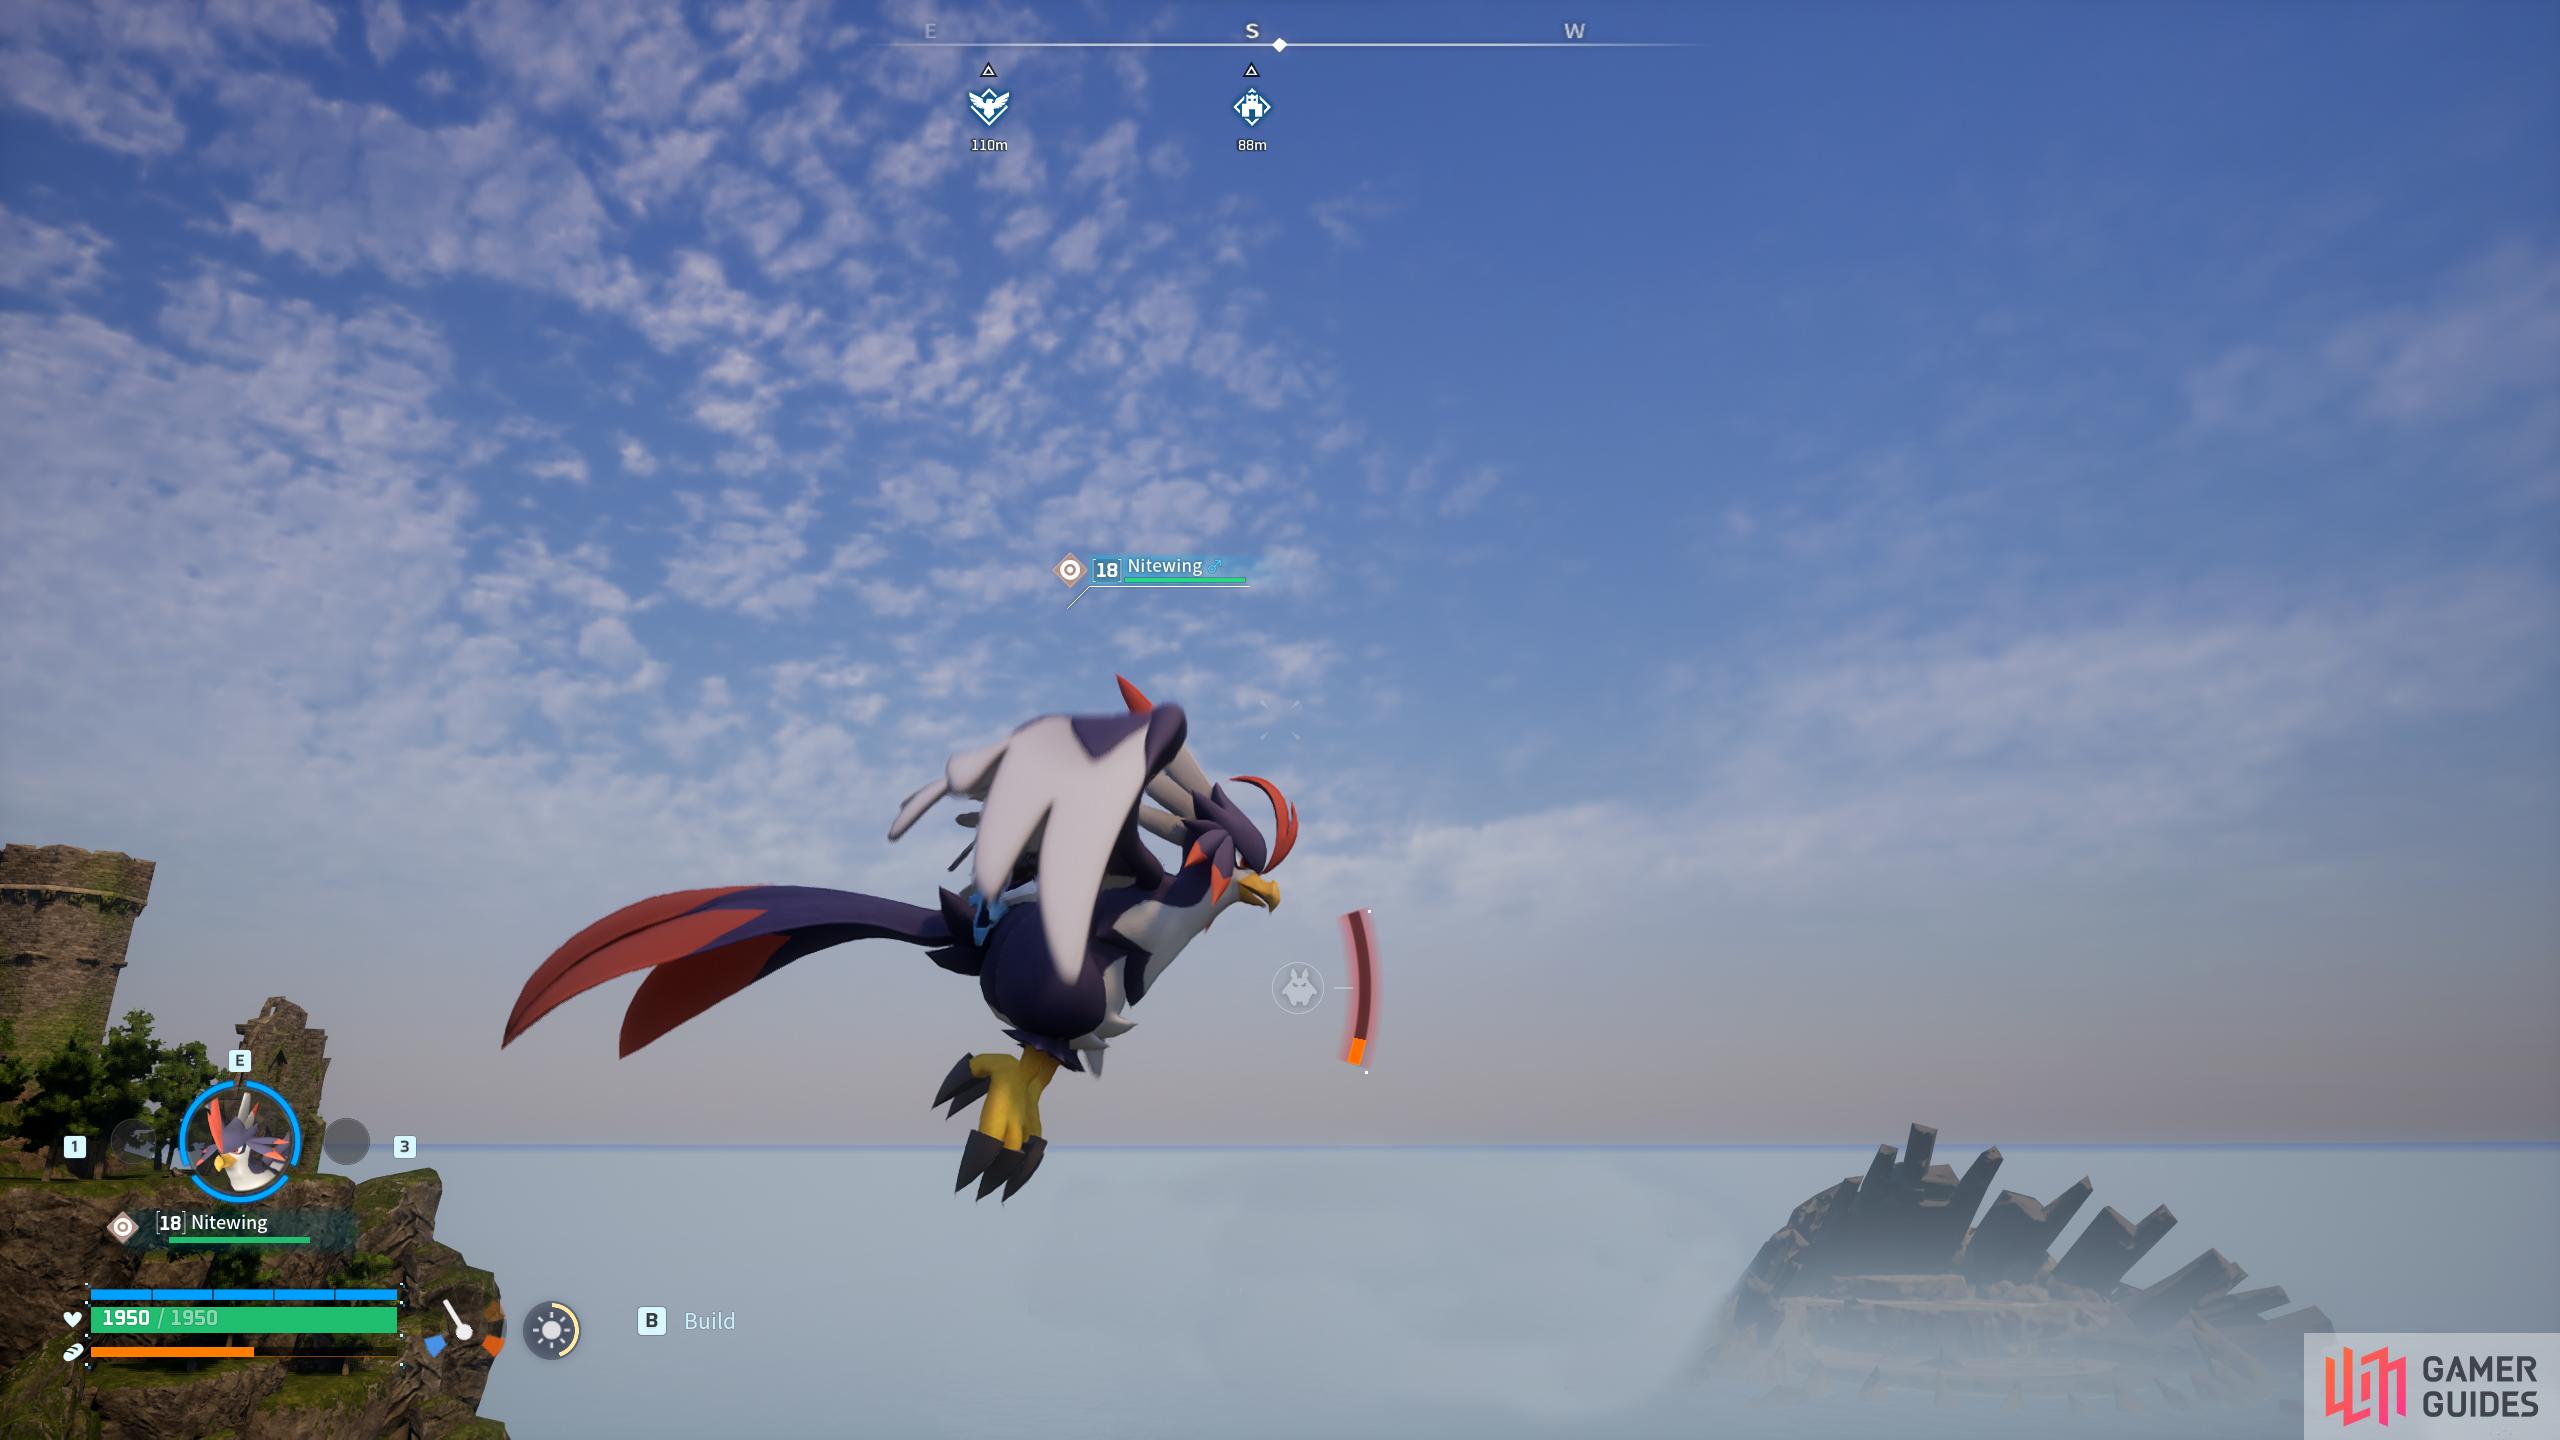 Nitewing is the first flying mount you’ll find in the game. 